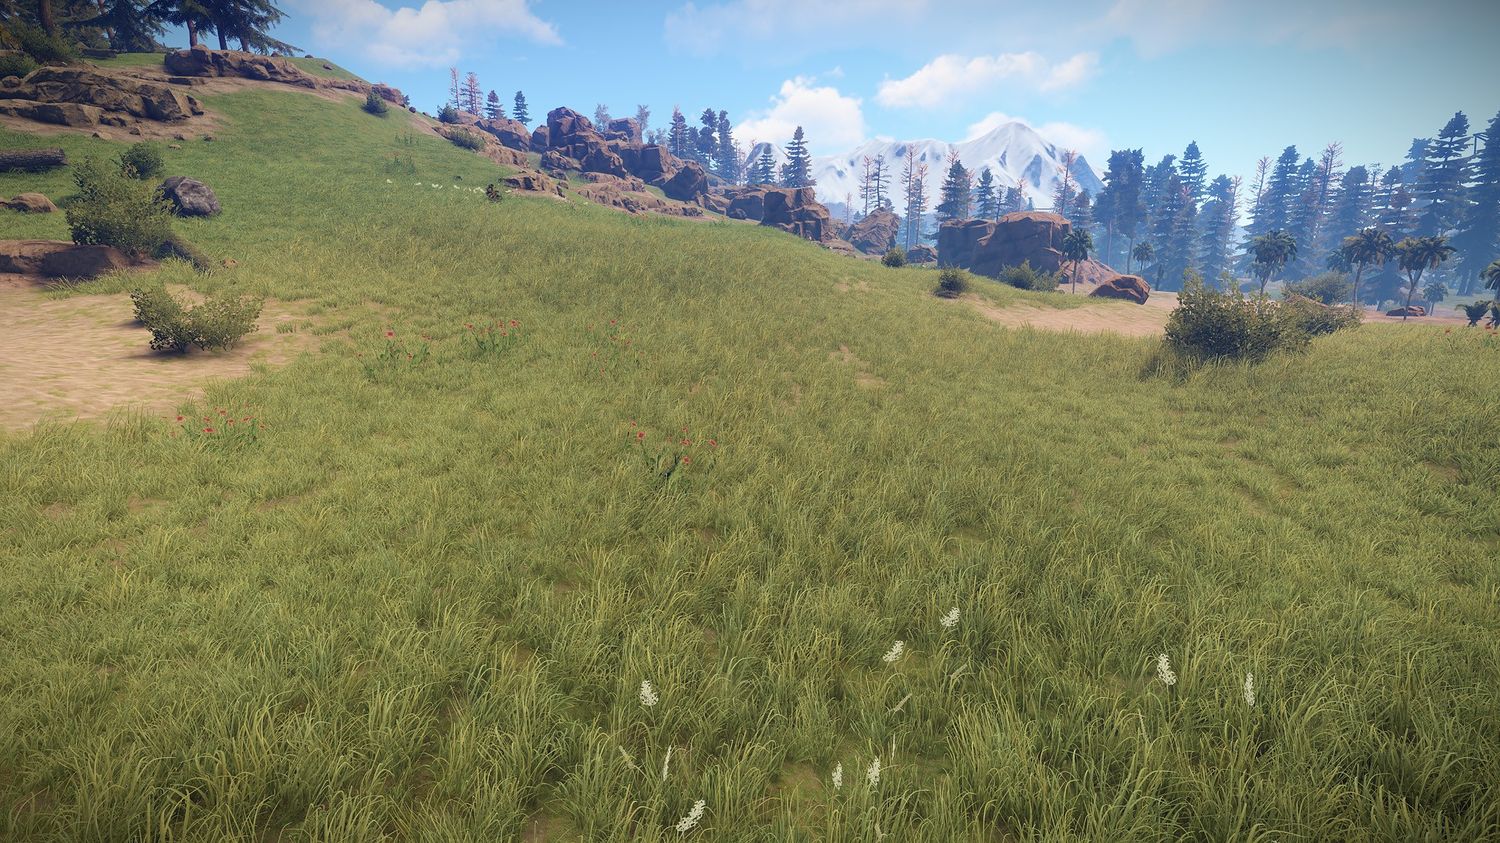 A screenshot from Rust showing off high grass quality, good luck looking for chickens in grass that thick.